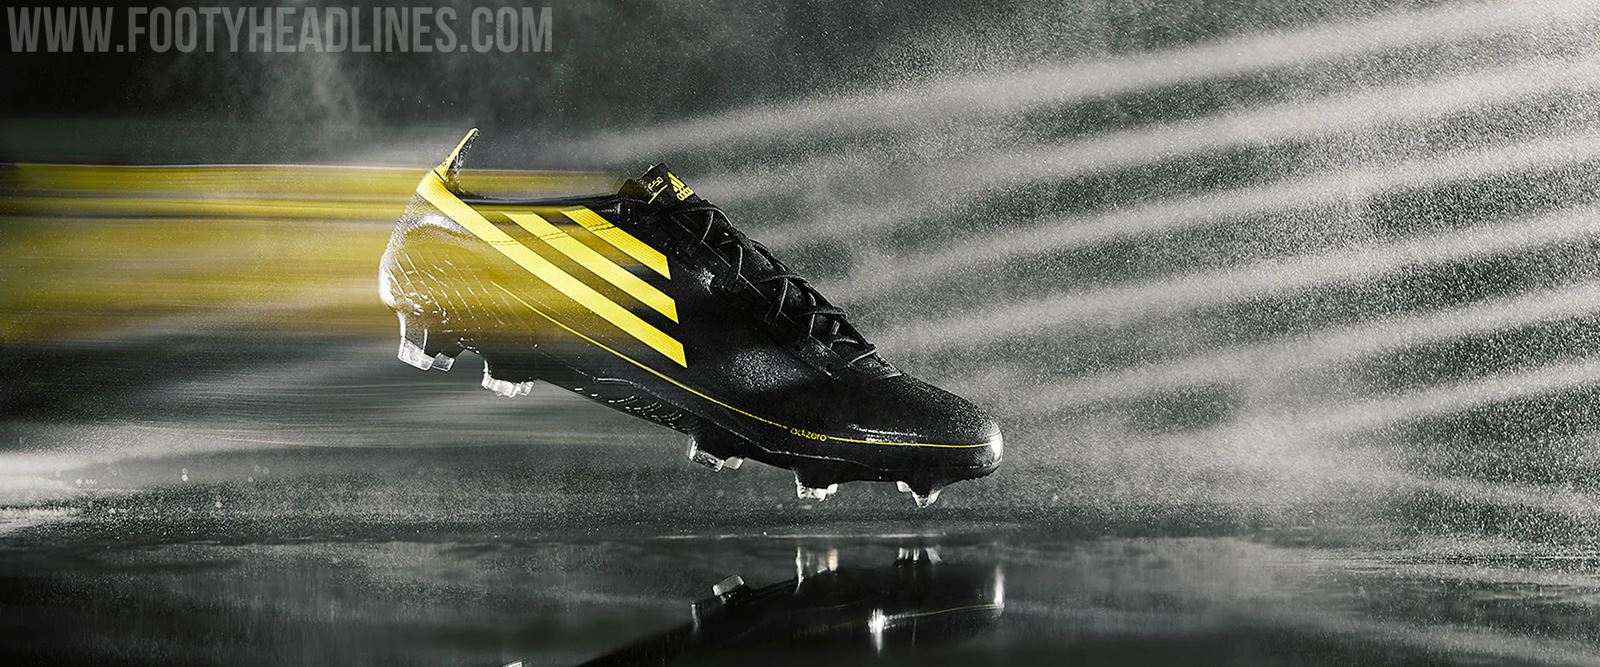 Black & Yellow Adidas F50 X Ghosted Adizero 2010-2020 Remake Released - Footy Headlines